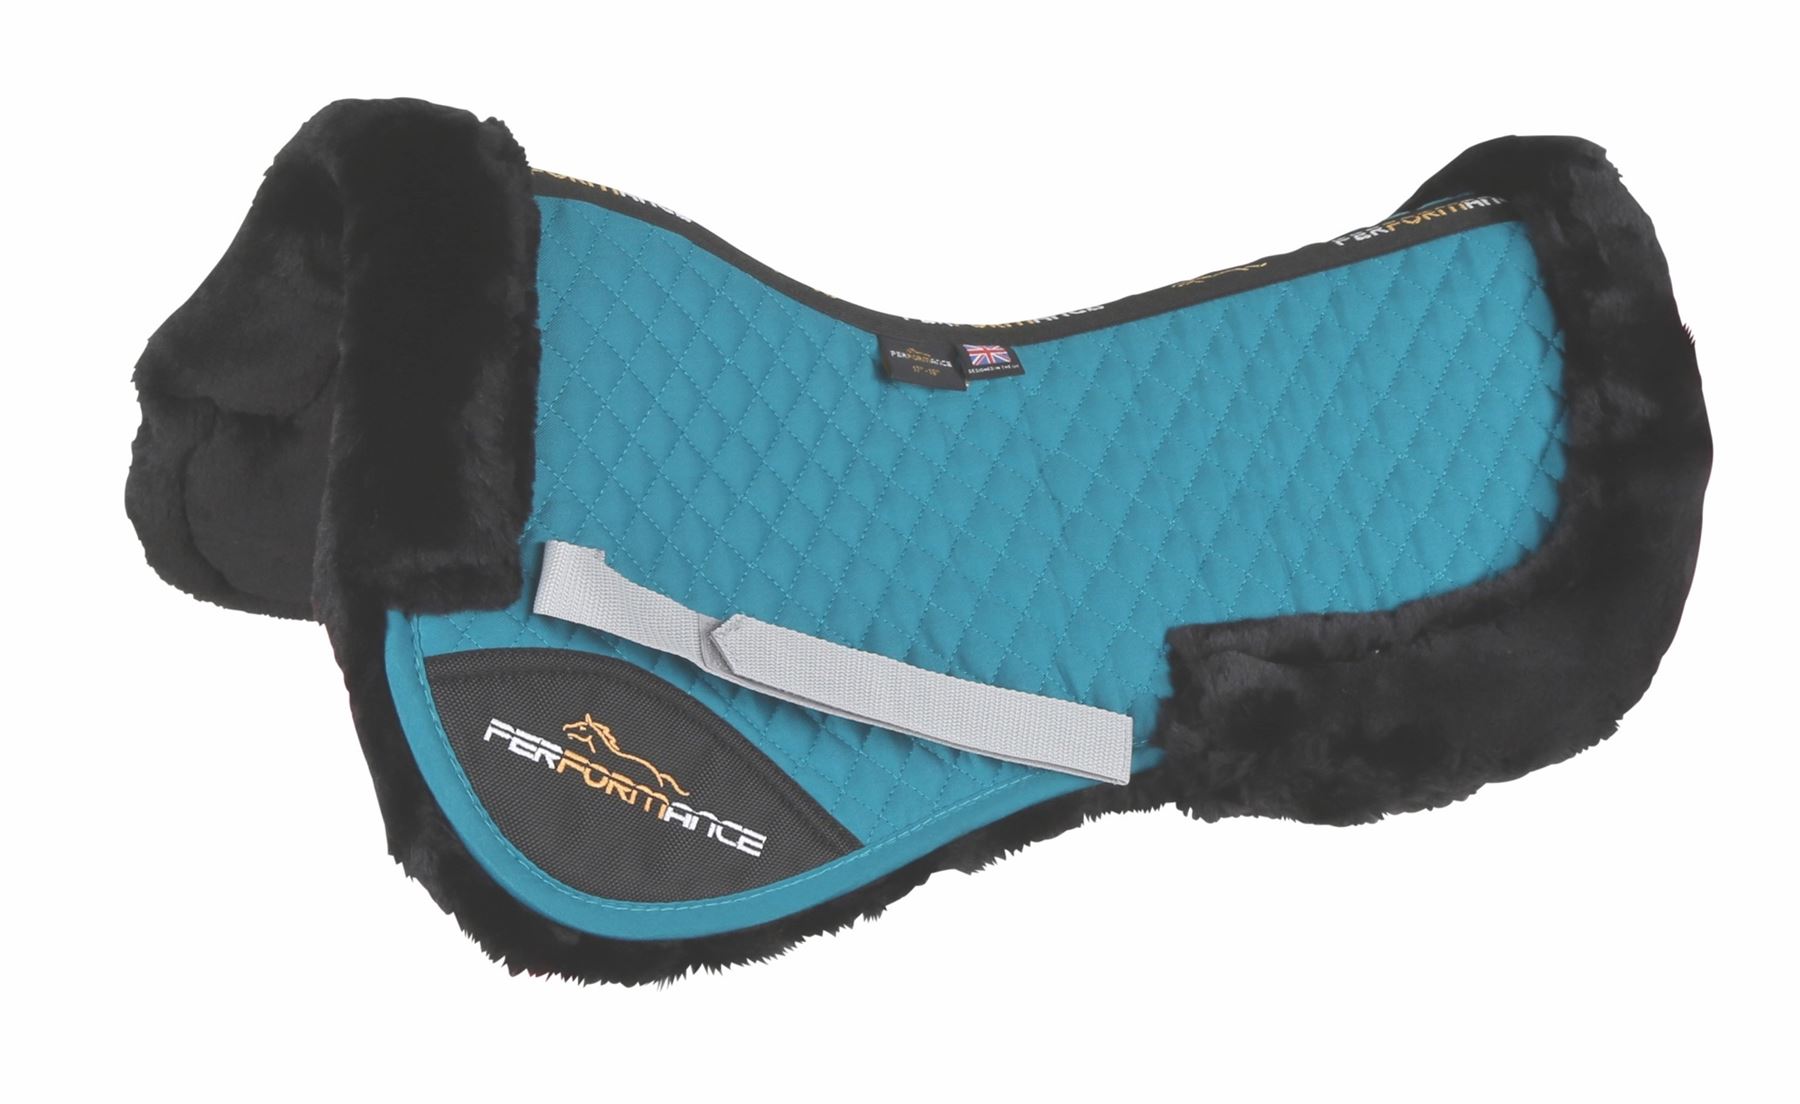 Shires Performance Half Pad - Just Horse Riders